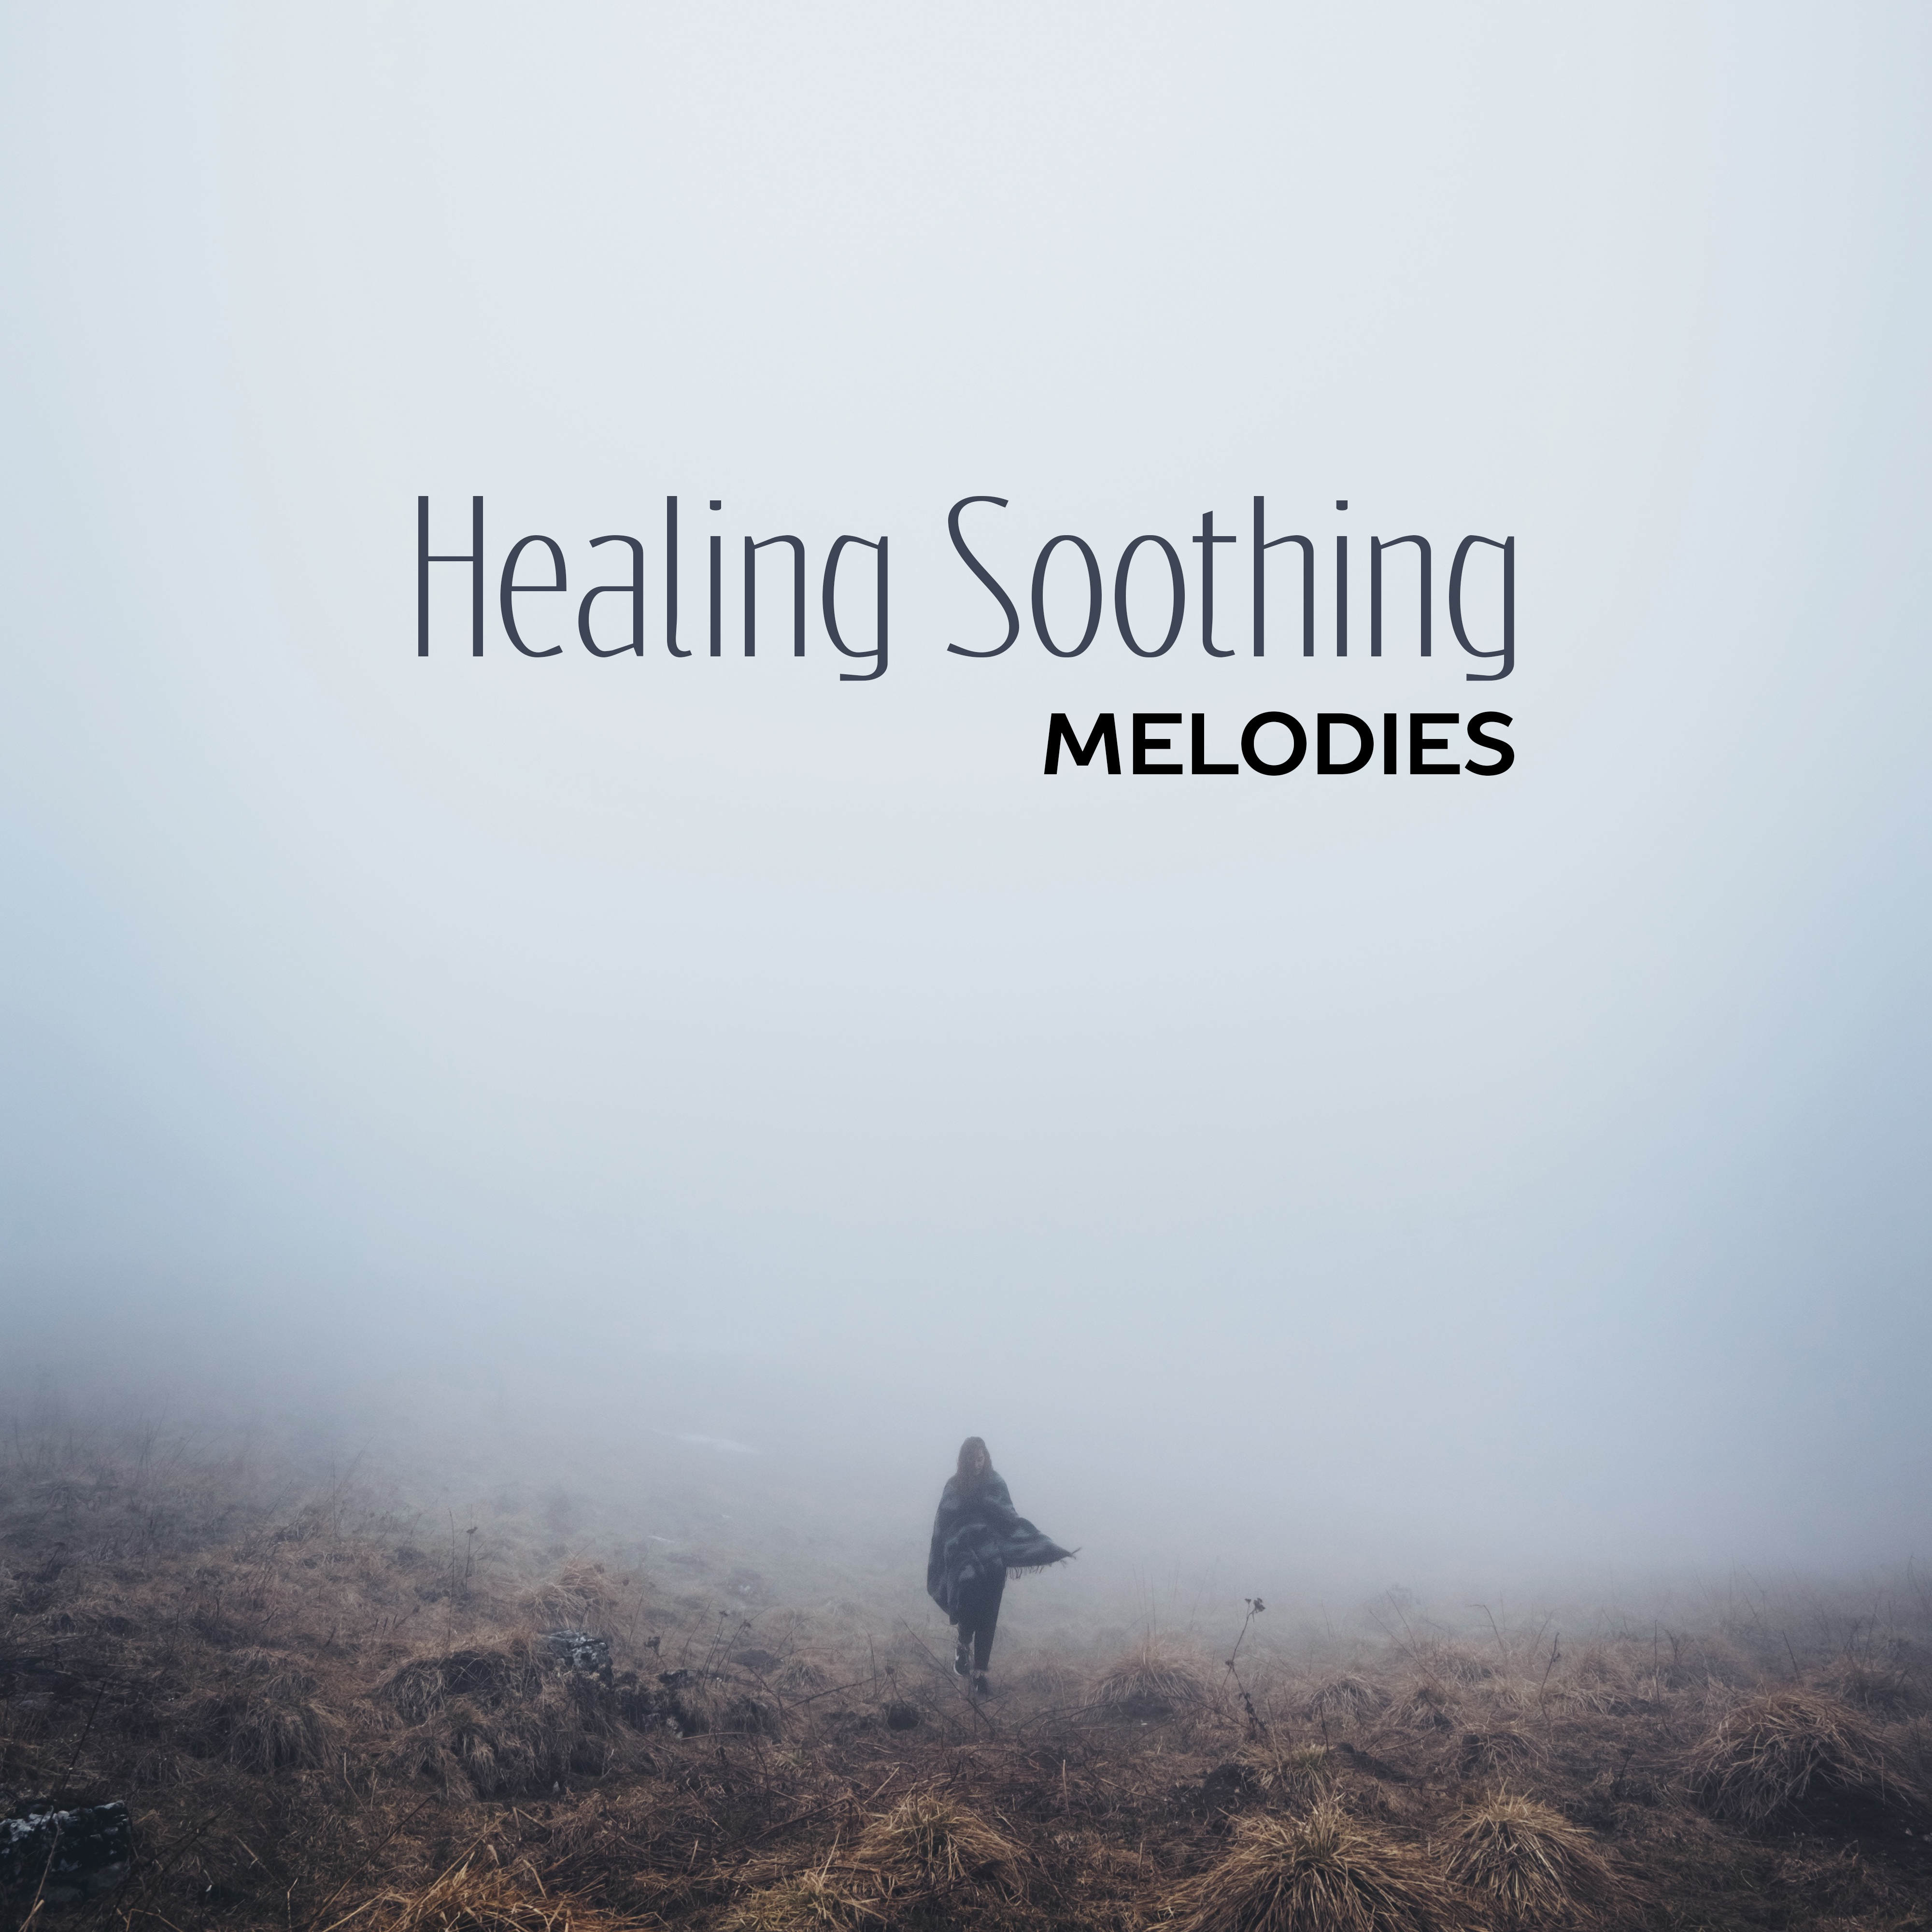 Healing Soothing Melodies